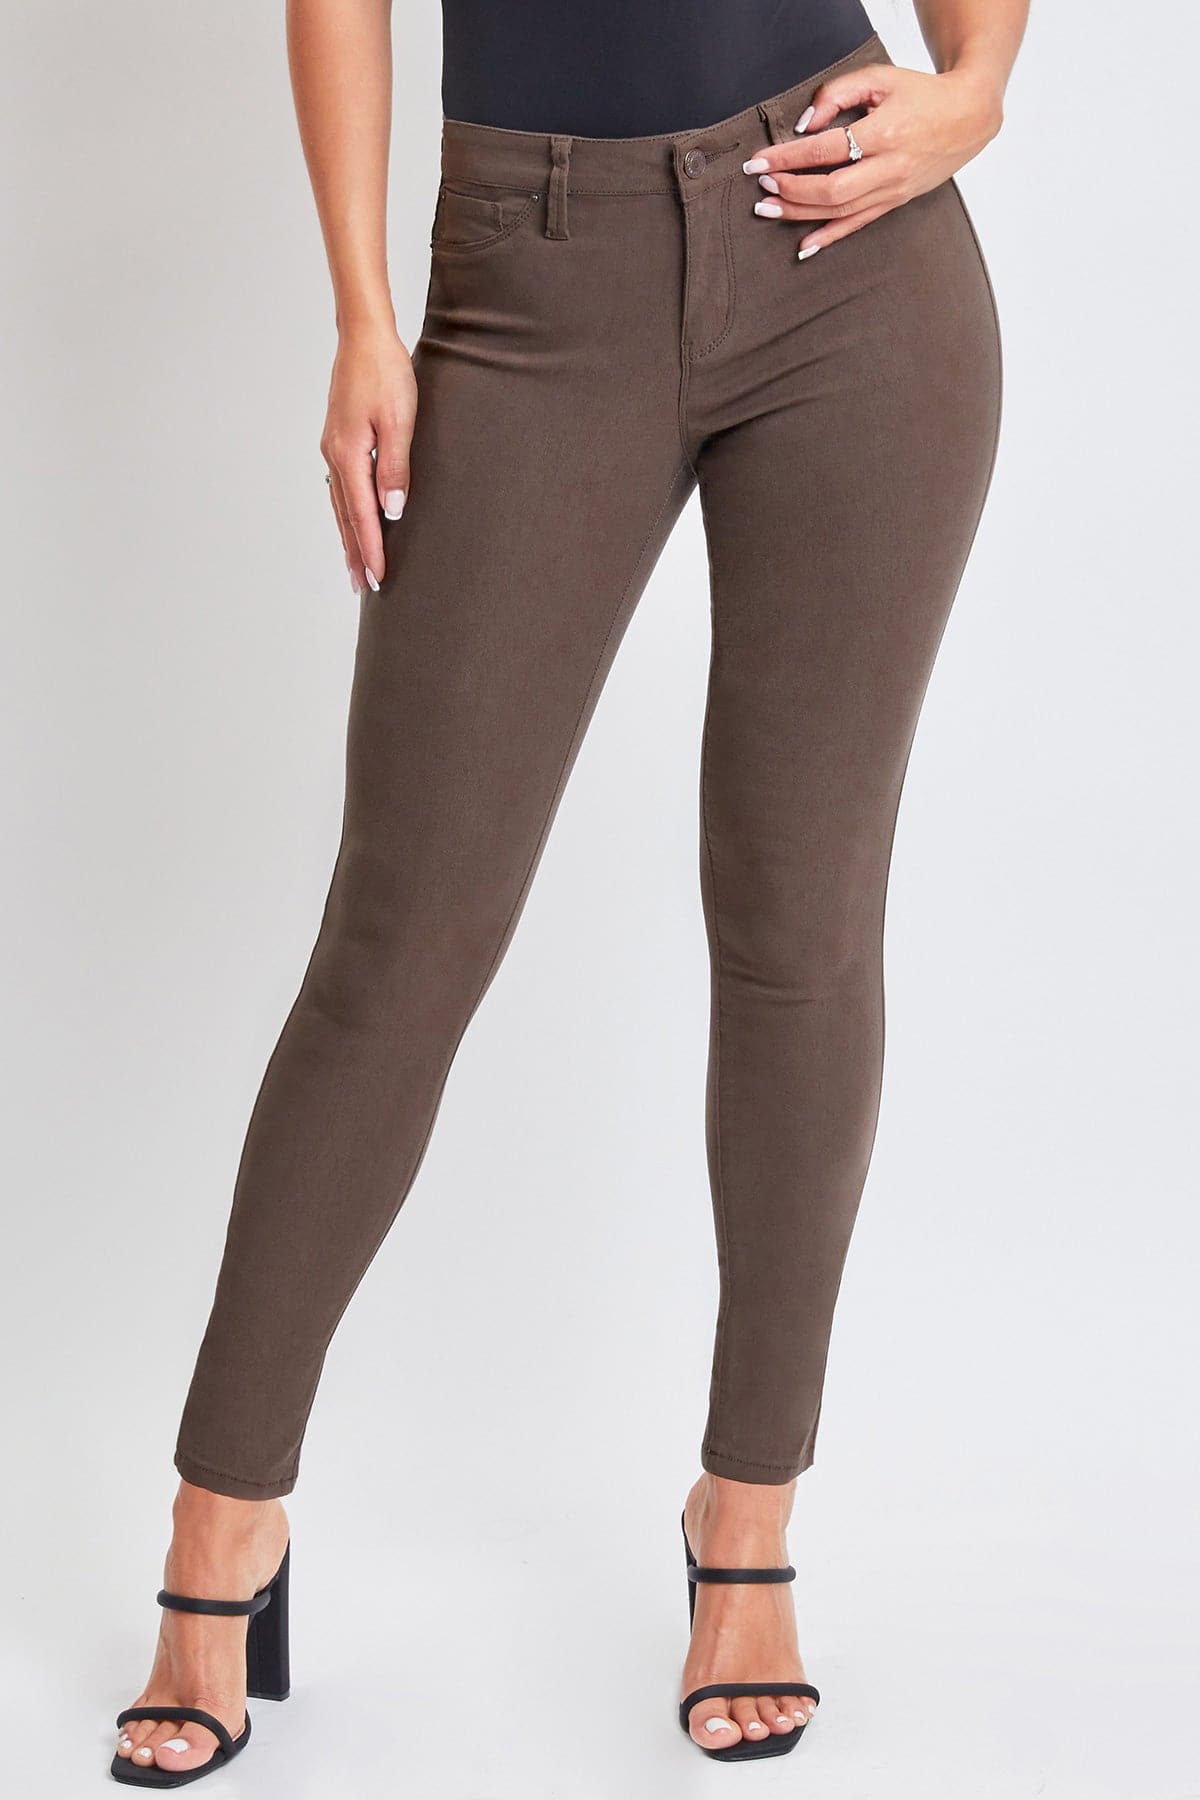 Women's Hyperstretch Forever Color Pants- Neutral